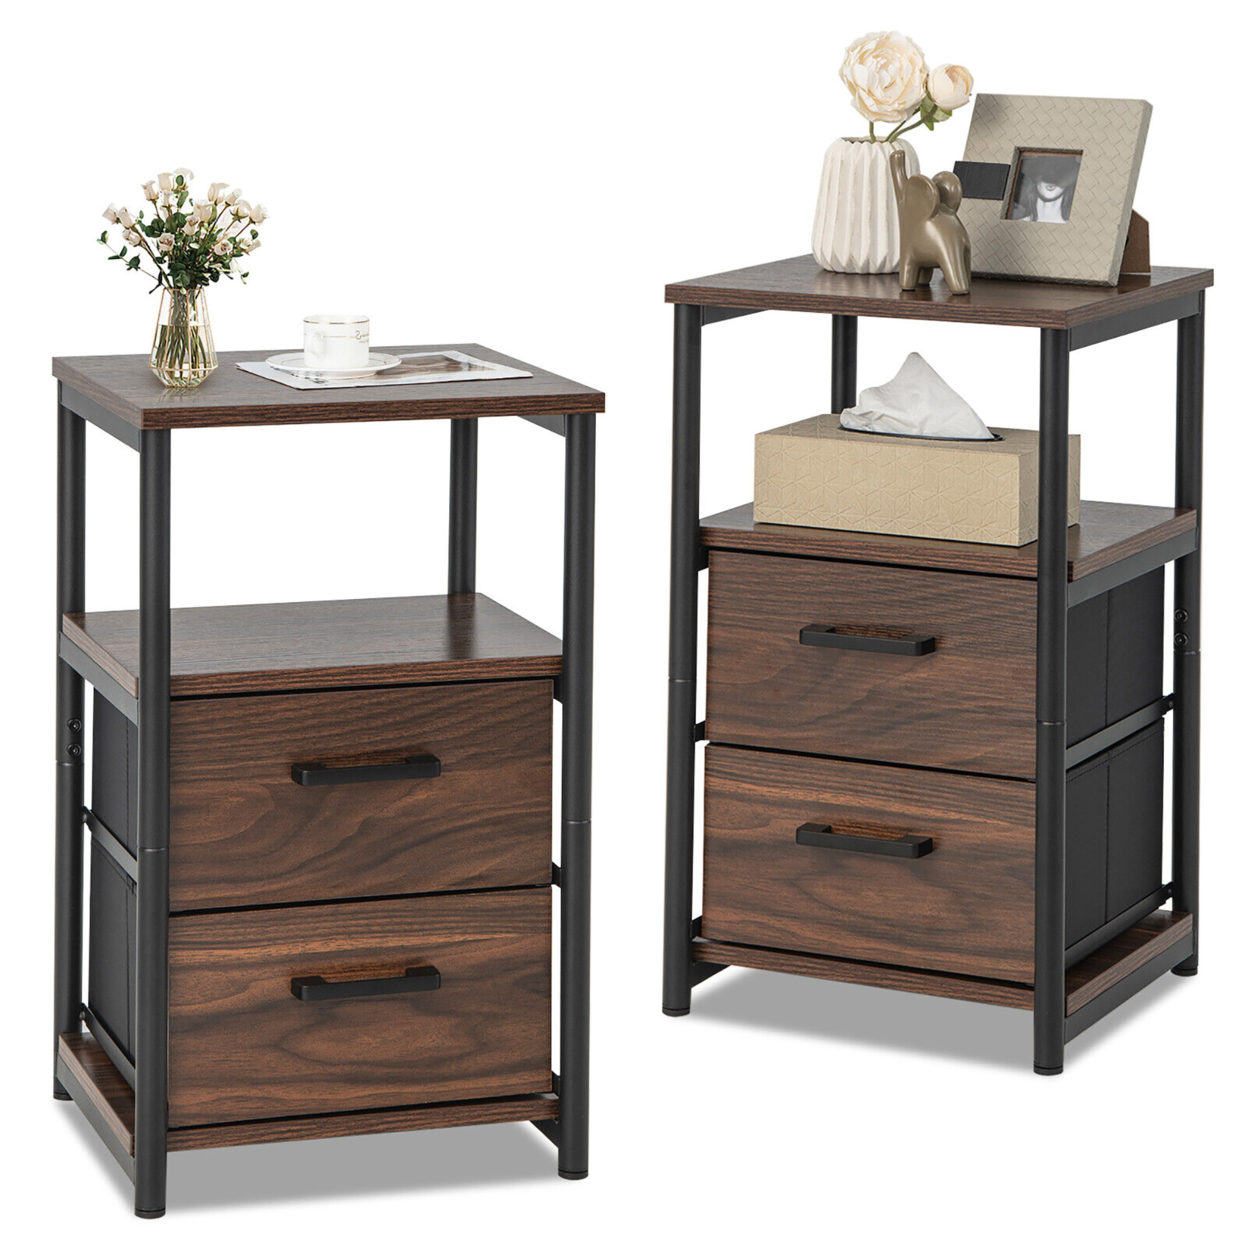 2PCS Nightstand Bedside End Table With 2 Fabric Drawers & Storage Shelf